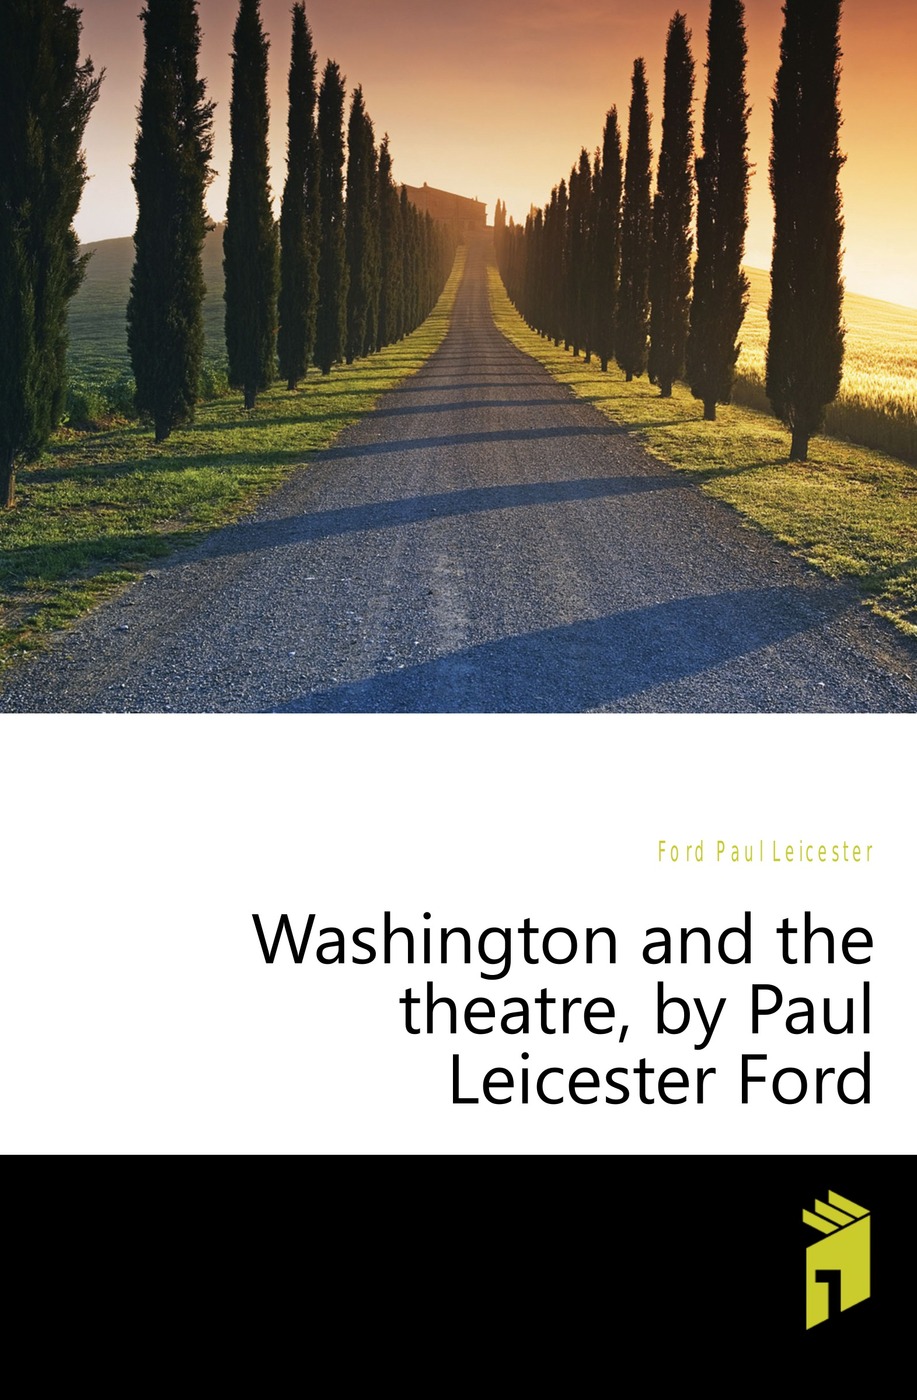 Washington and the theatre, by Paul Leicester Ford